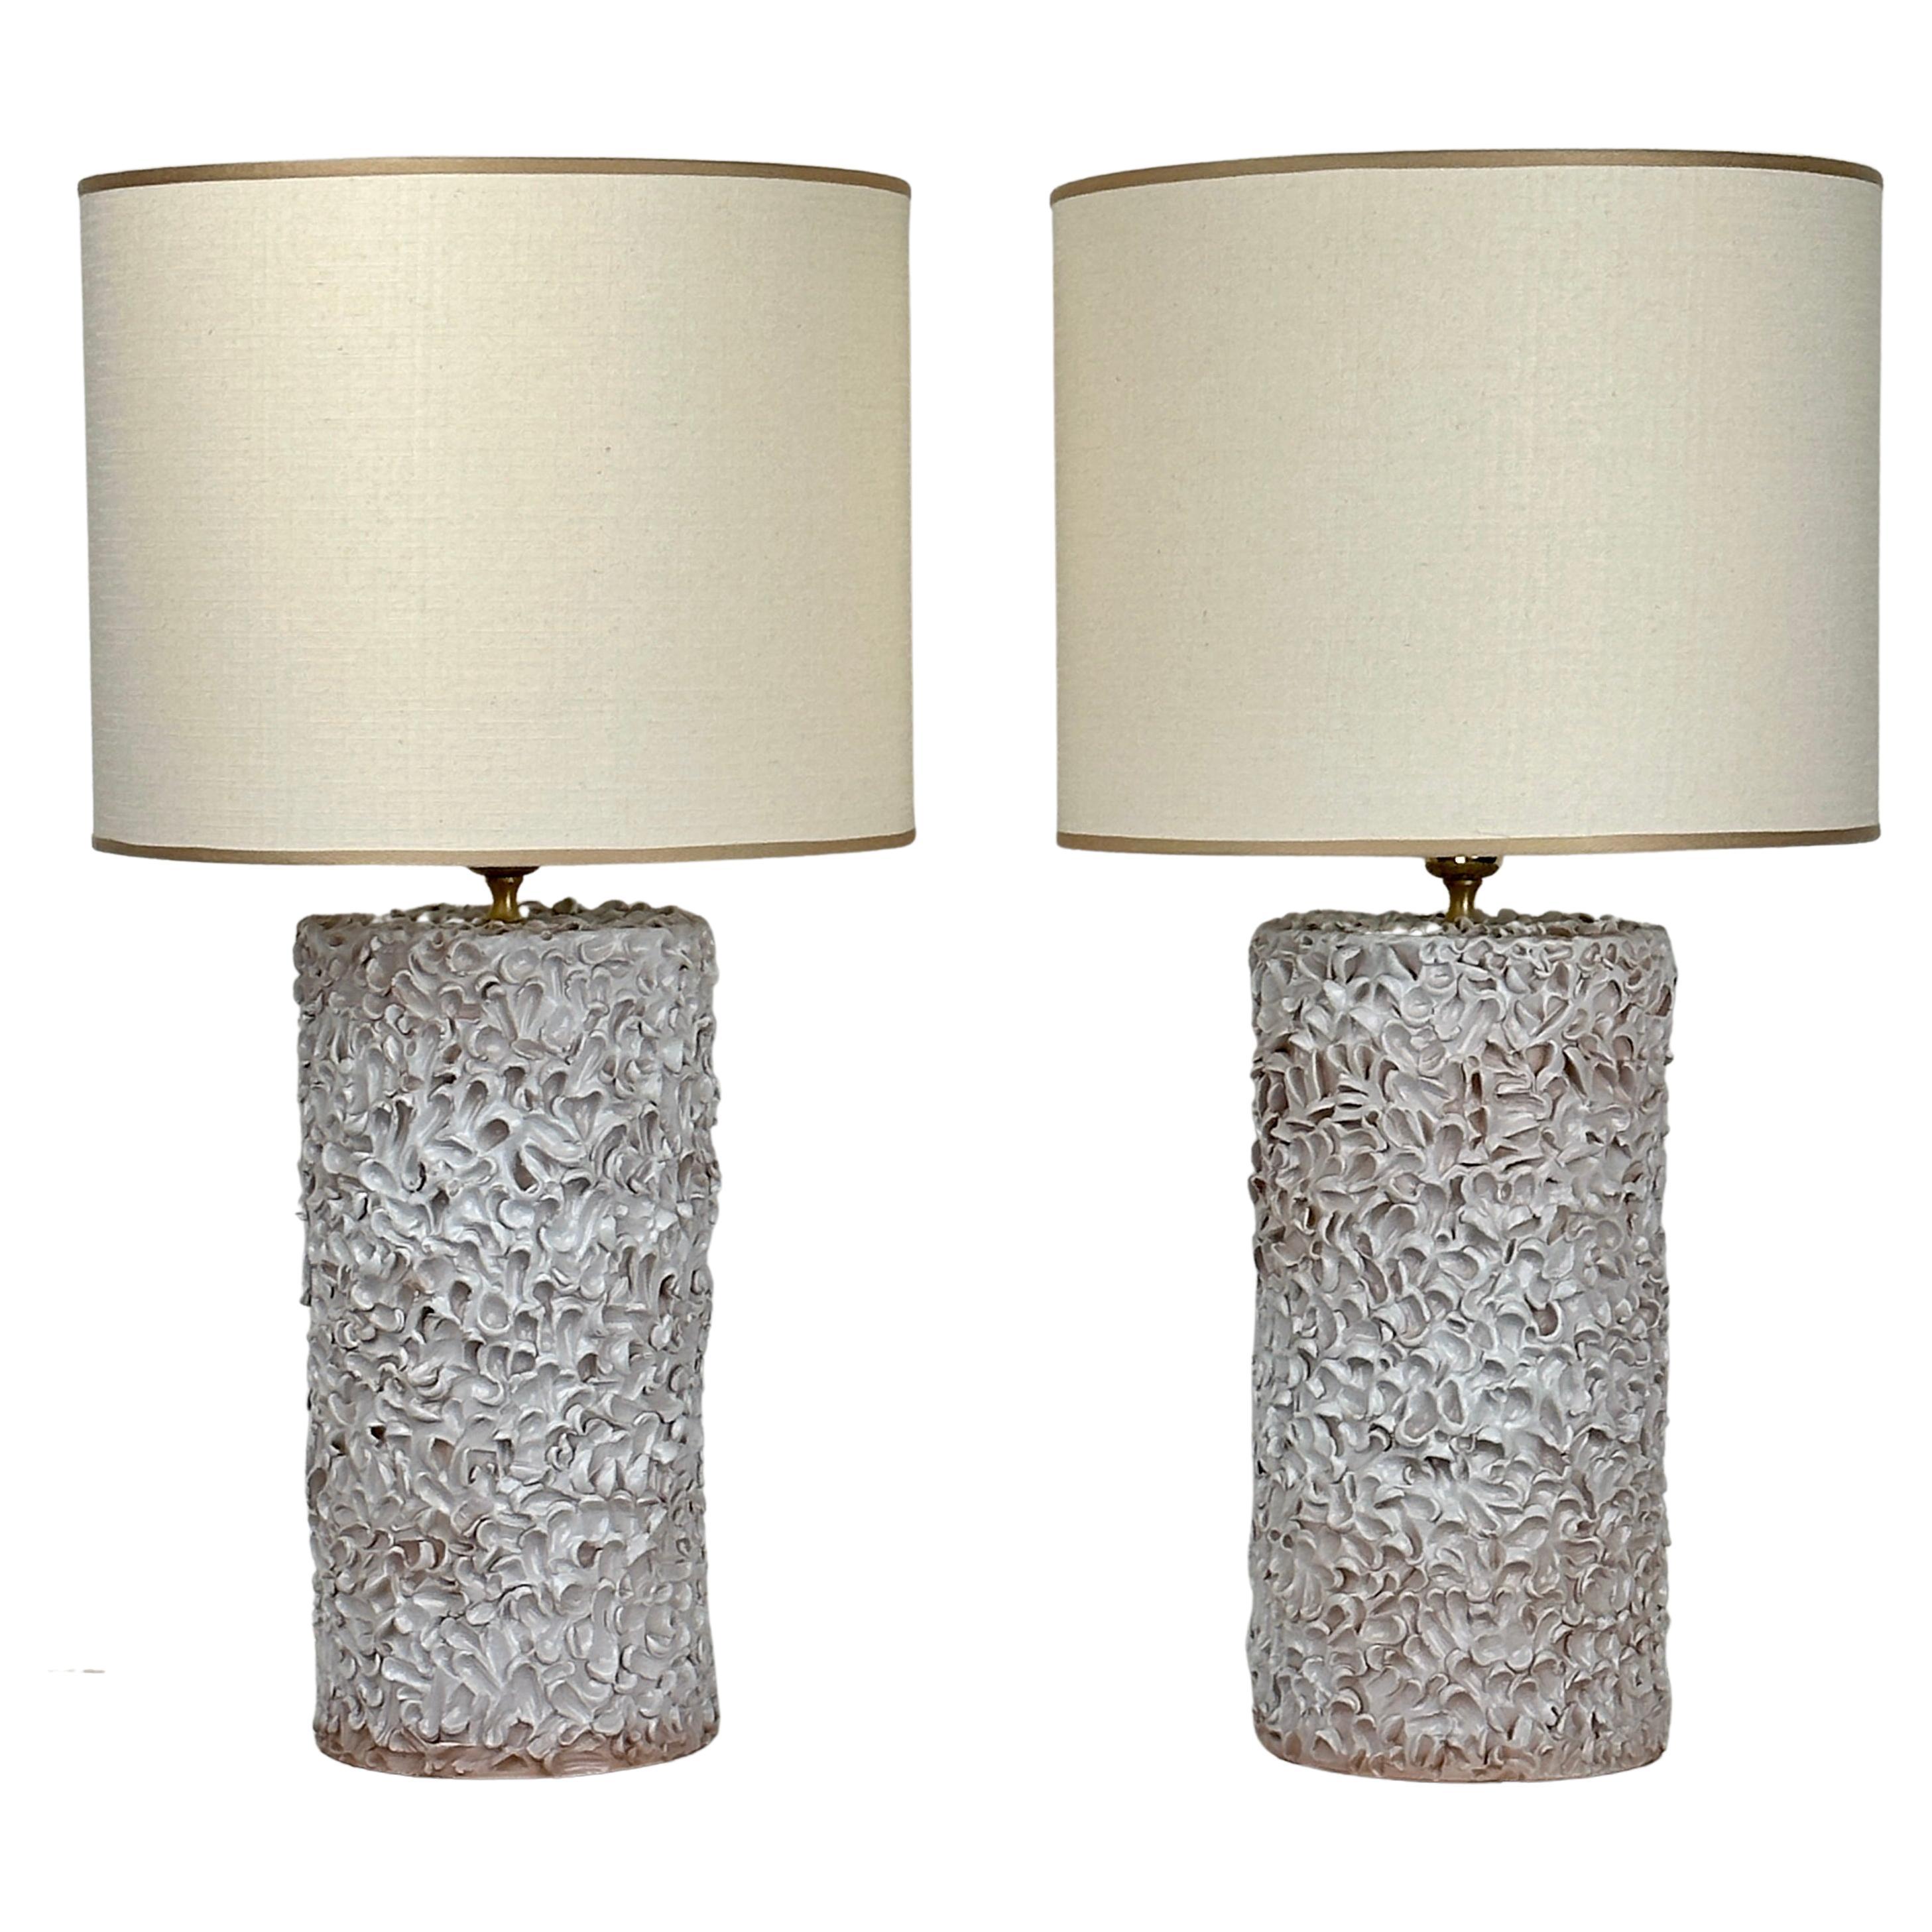 Late 20th Century Pair of Italian White Ceramic Sculptural Table Lamps w/ Shades For Sale